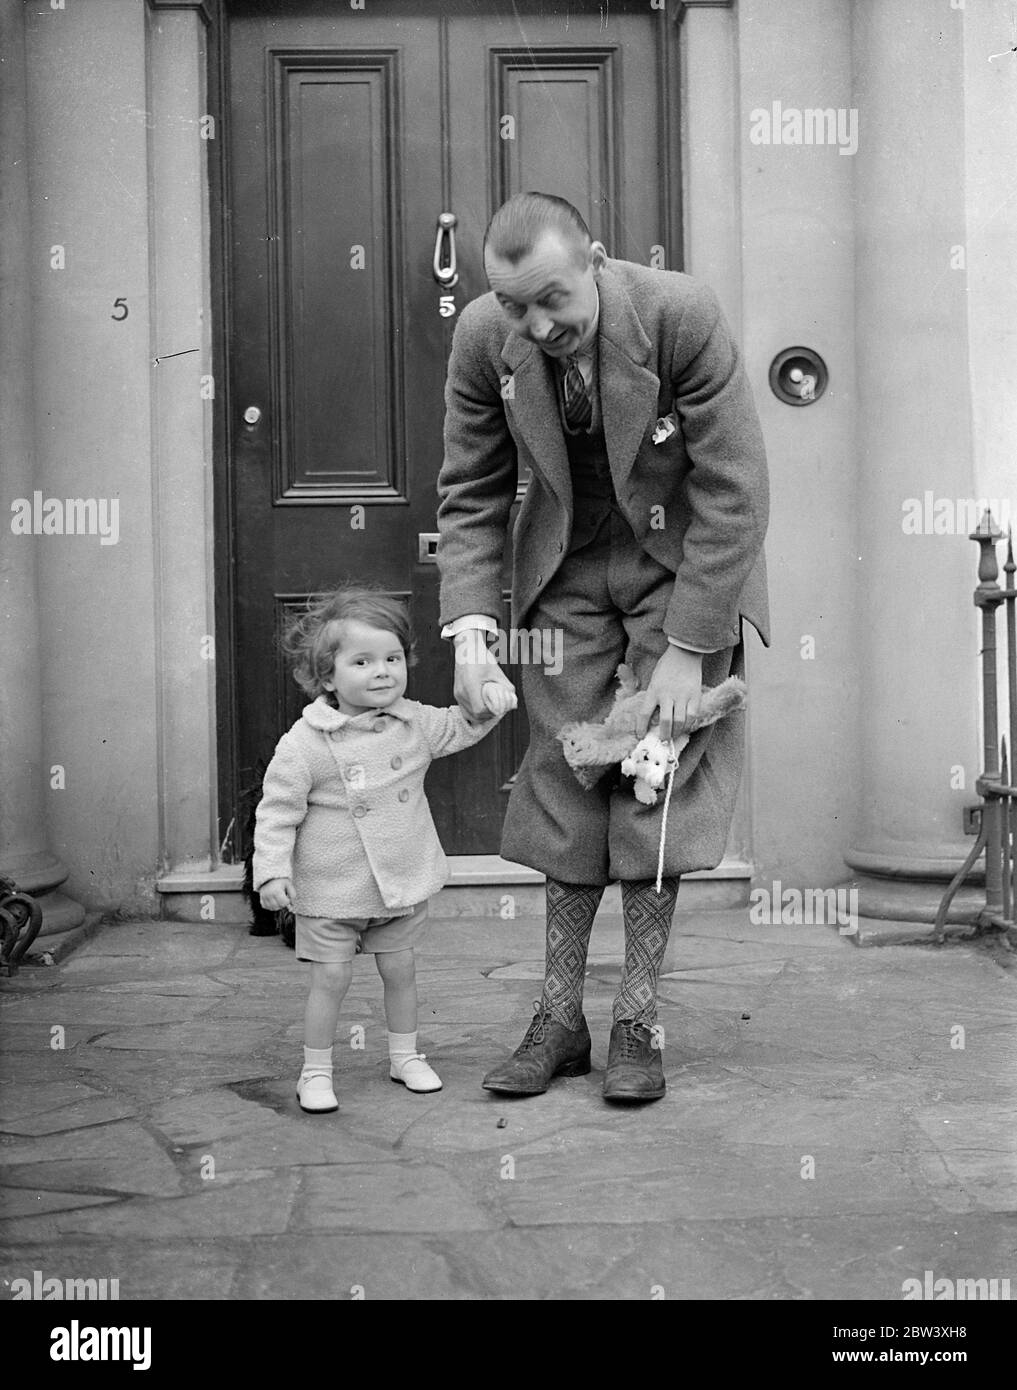 Good Friday was the second birthday of Viscount Dupplin, son of Lord and Lady Kinnoull. The little Viscount celebrate the anniversary by playing games with his father and two older sisters, Lady Vanetia and Lady June Hay, in the garden of their home at Regents Park. Photo shows: the Viscount Dupplin, aged two, with his father, Lord Kinnoull. 26th March 1937 Stock Photo